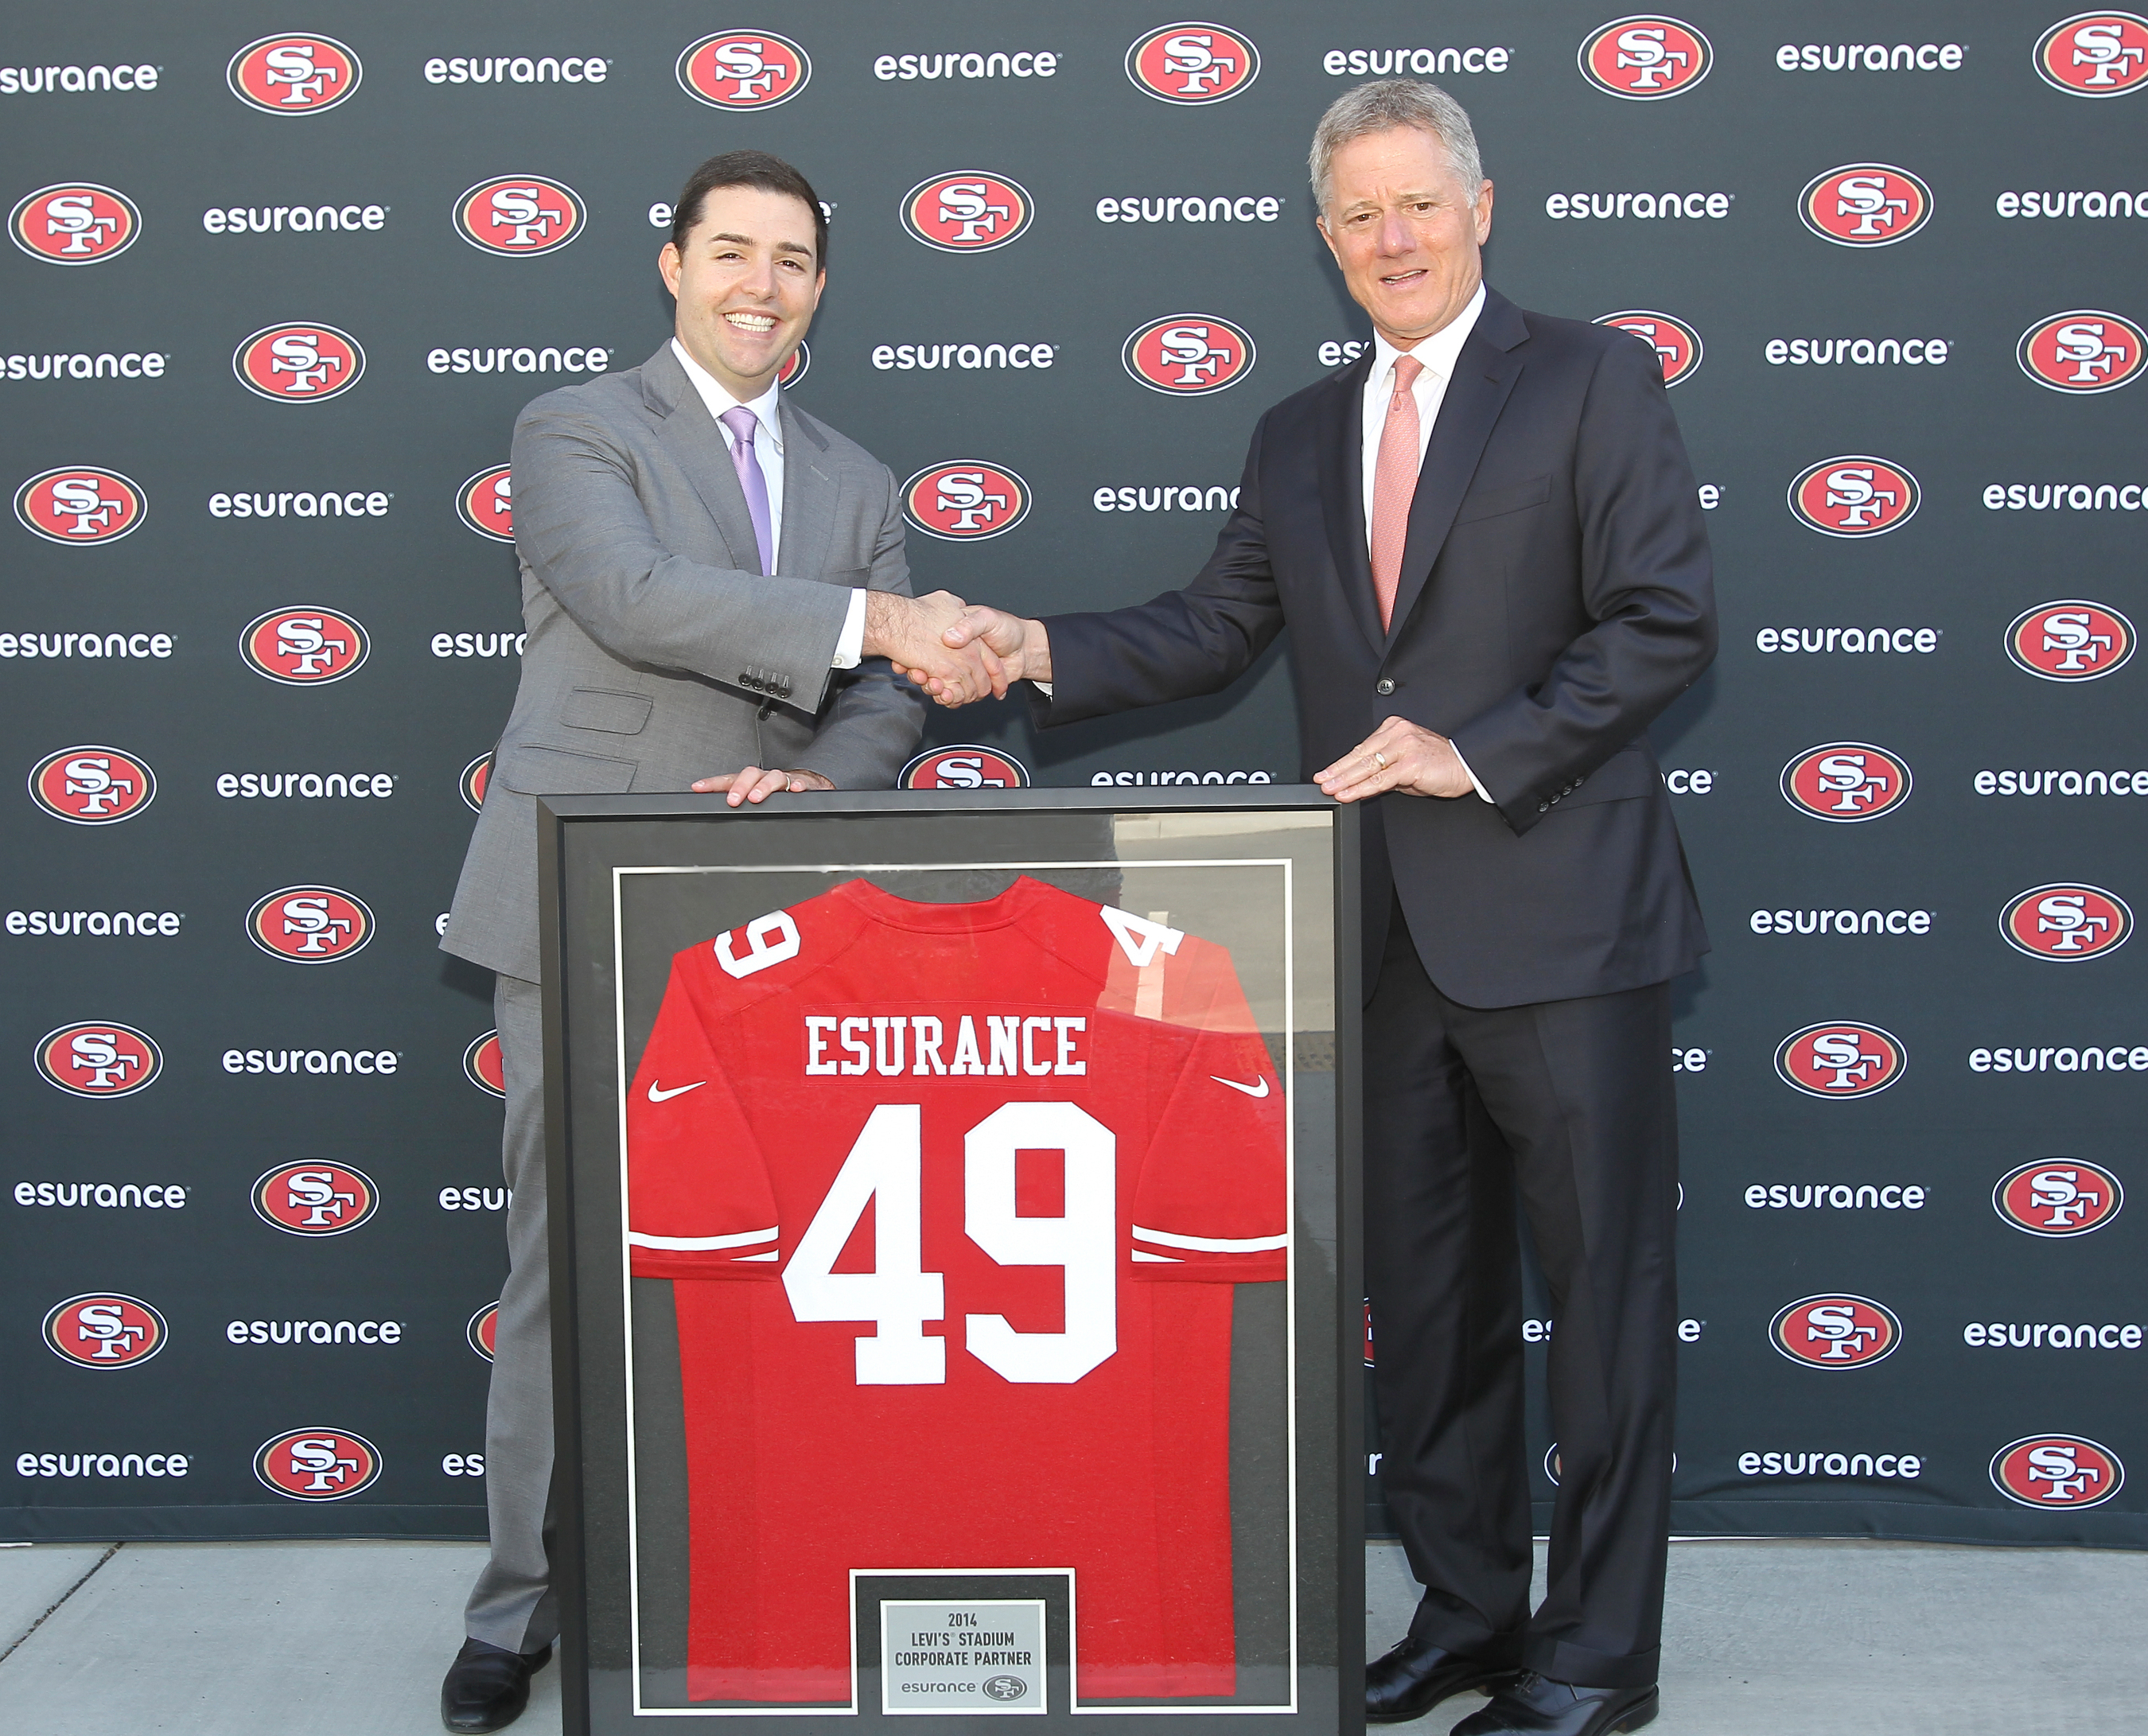 49ers CEO Jed York (left) with Esurance President and CEO Gary C. Tolman (right) (PRNewsFoto/Esurance)